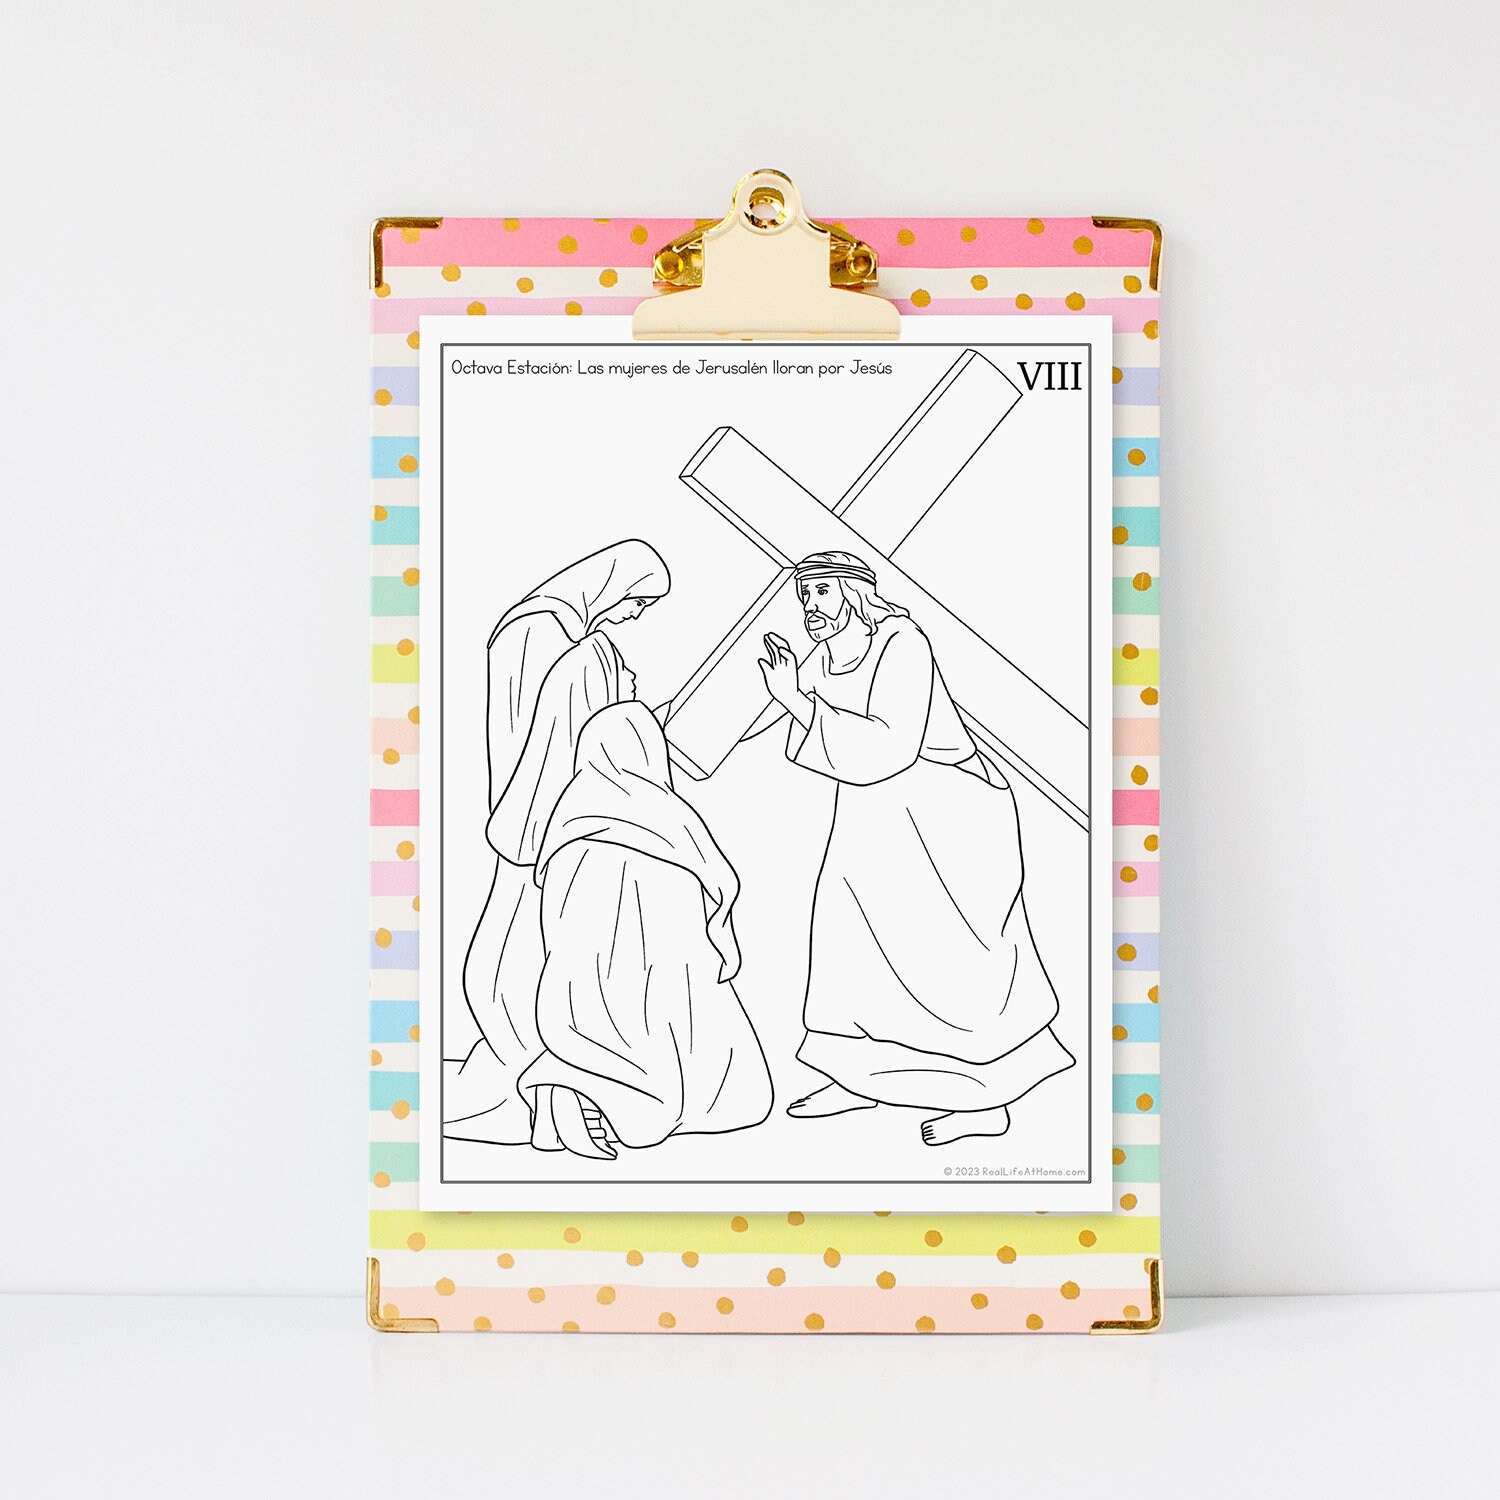 Stations of the cross coloring pages in spanish for kids teens adults stations included